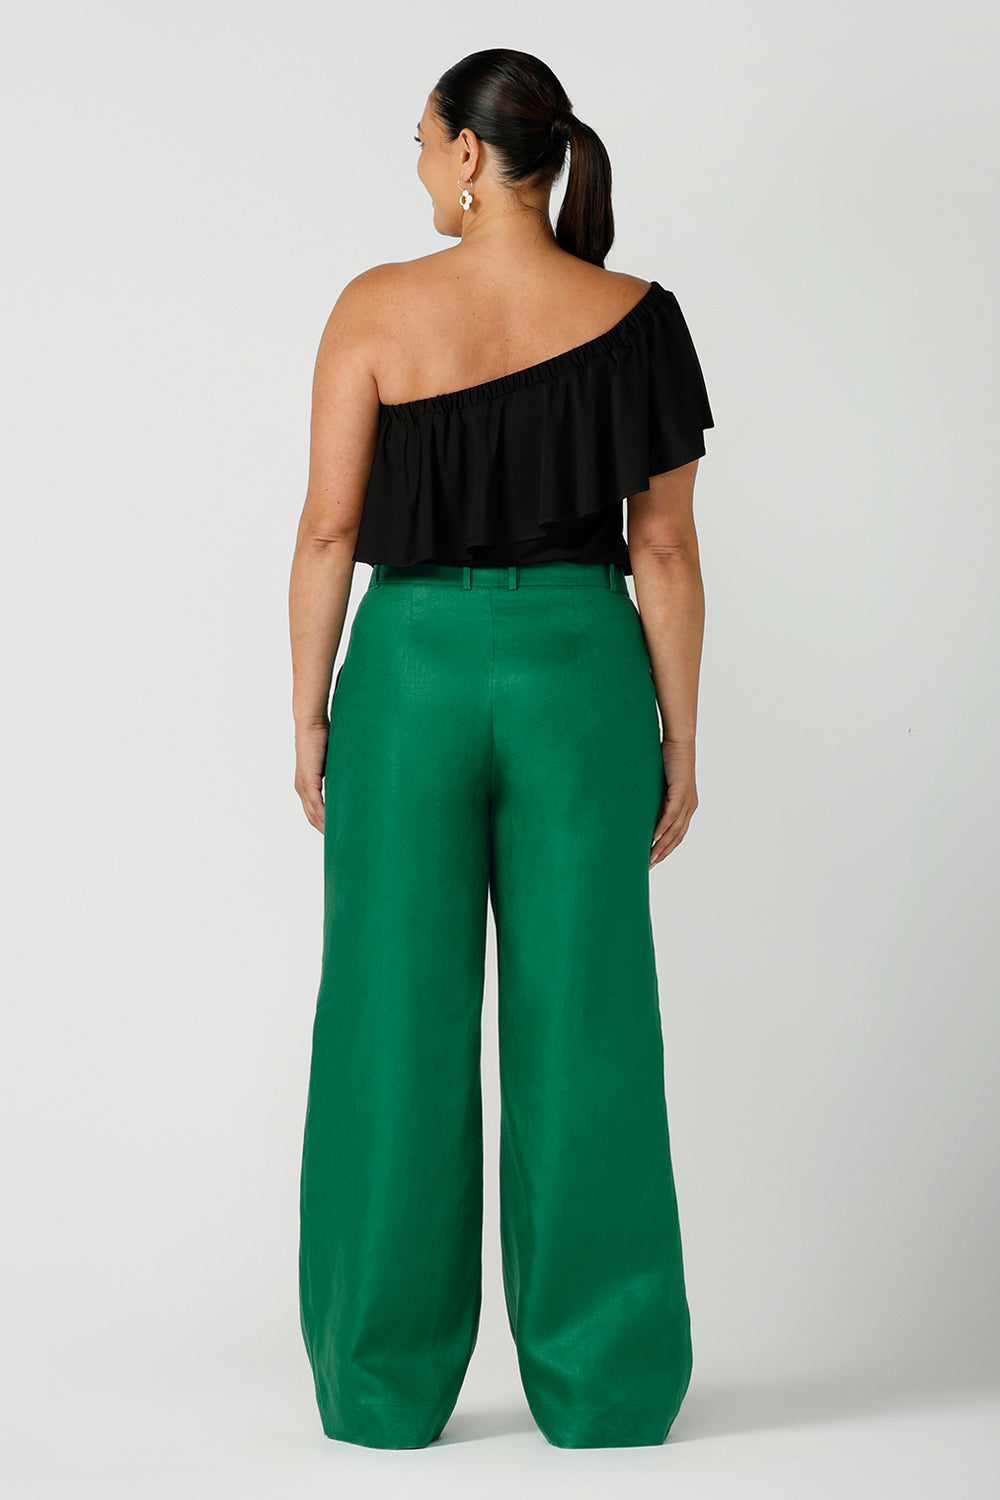 Back view of Back view size 12 woman wears an off shoulder ruffle Briar top in black. A versatile top that can be worn off or on shoulder 3 ways. Worn with emerald green linen tailore pants. Great for summer. Designed and made in Australia sizes 8-24.